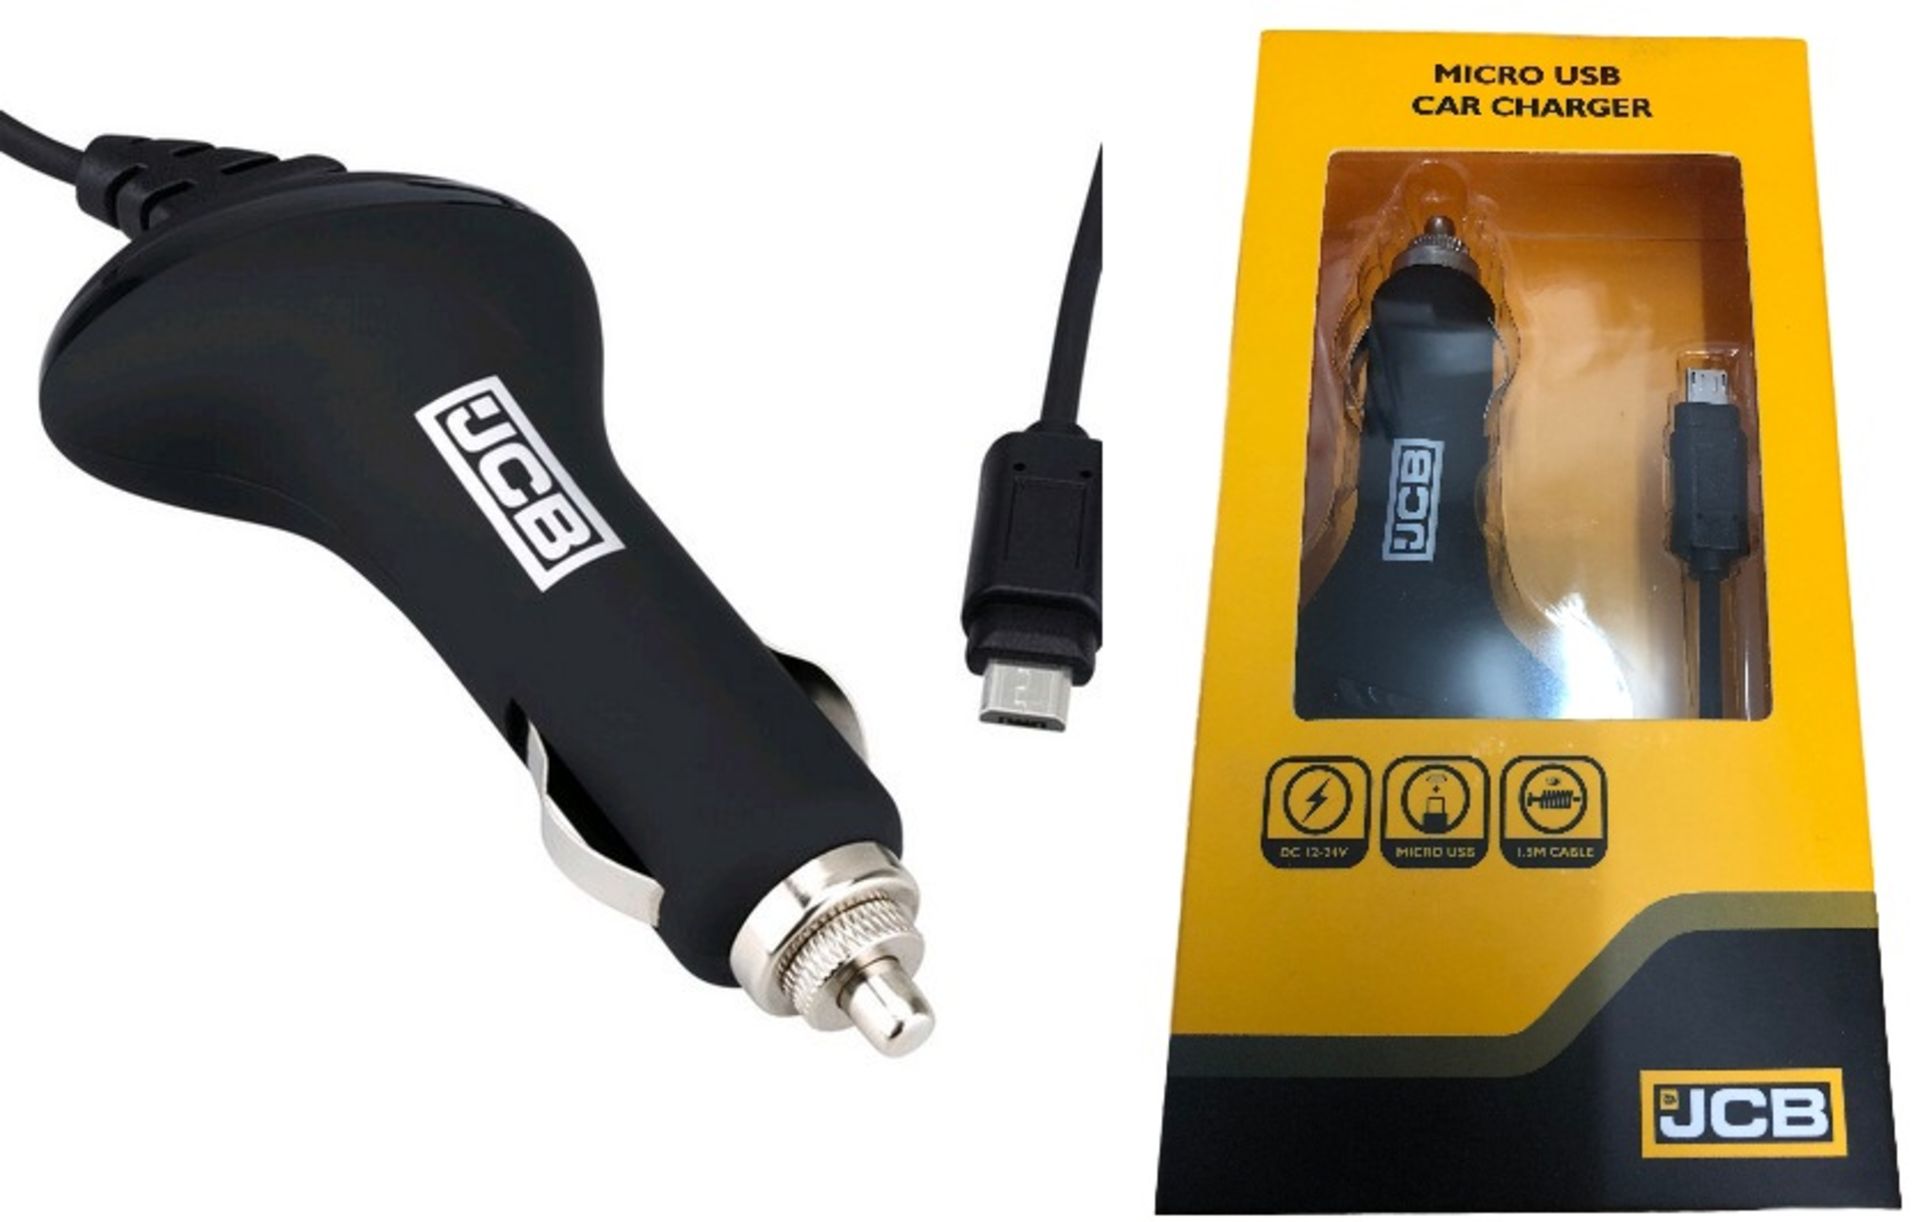 V Brand New JCB 12V Micro USB Car Charger - DC 12-24V - Micro USB Connector - 1.5M Coiled Cable - - Image 2 of 4